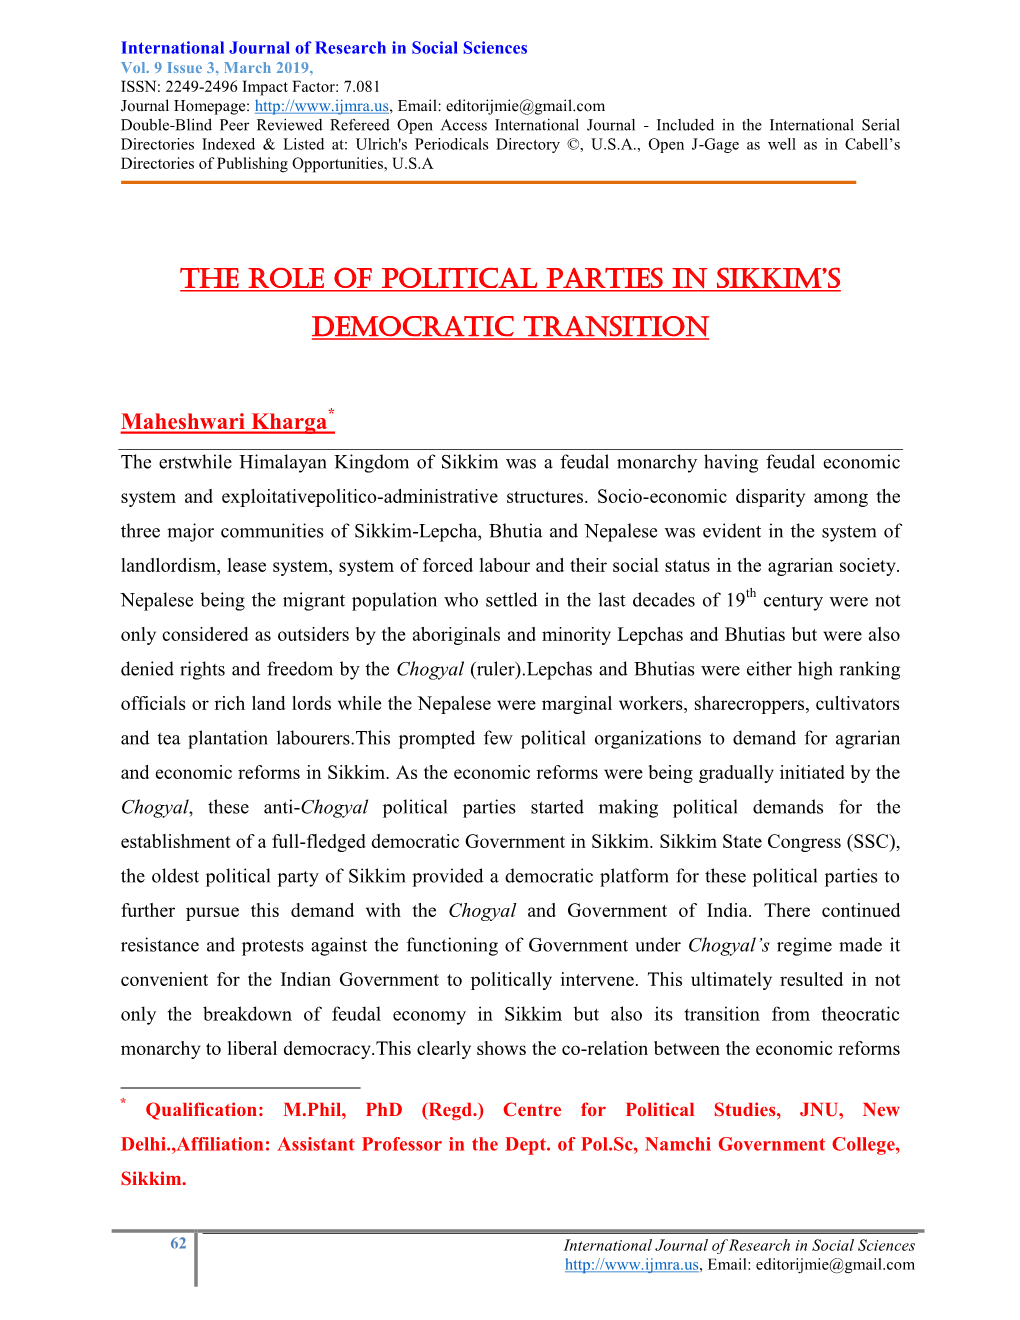 The Role of Political Parties in Sikkim's Democratic